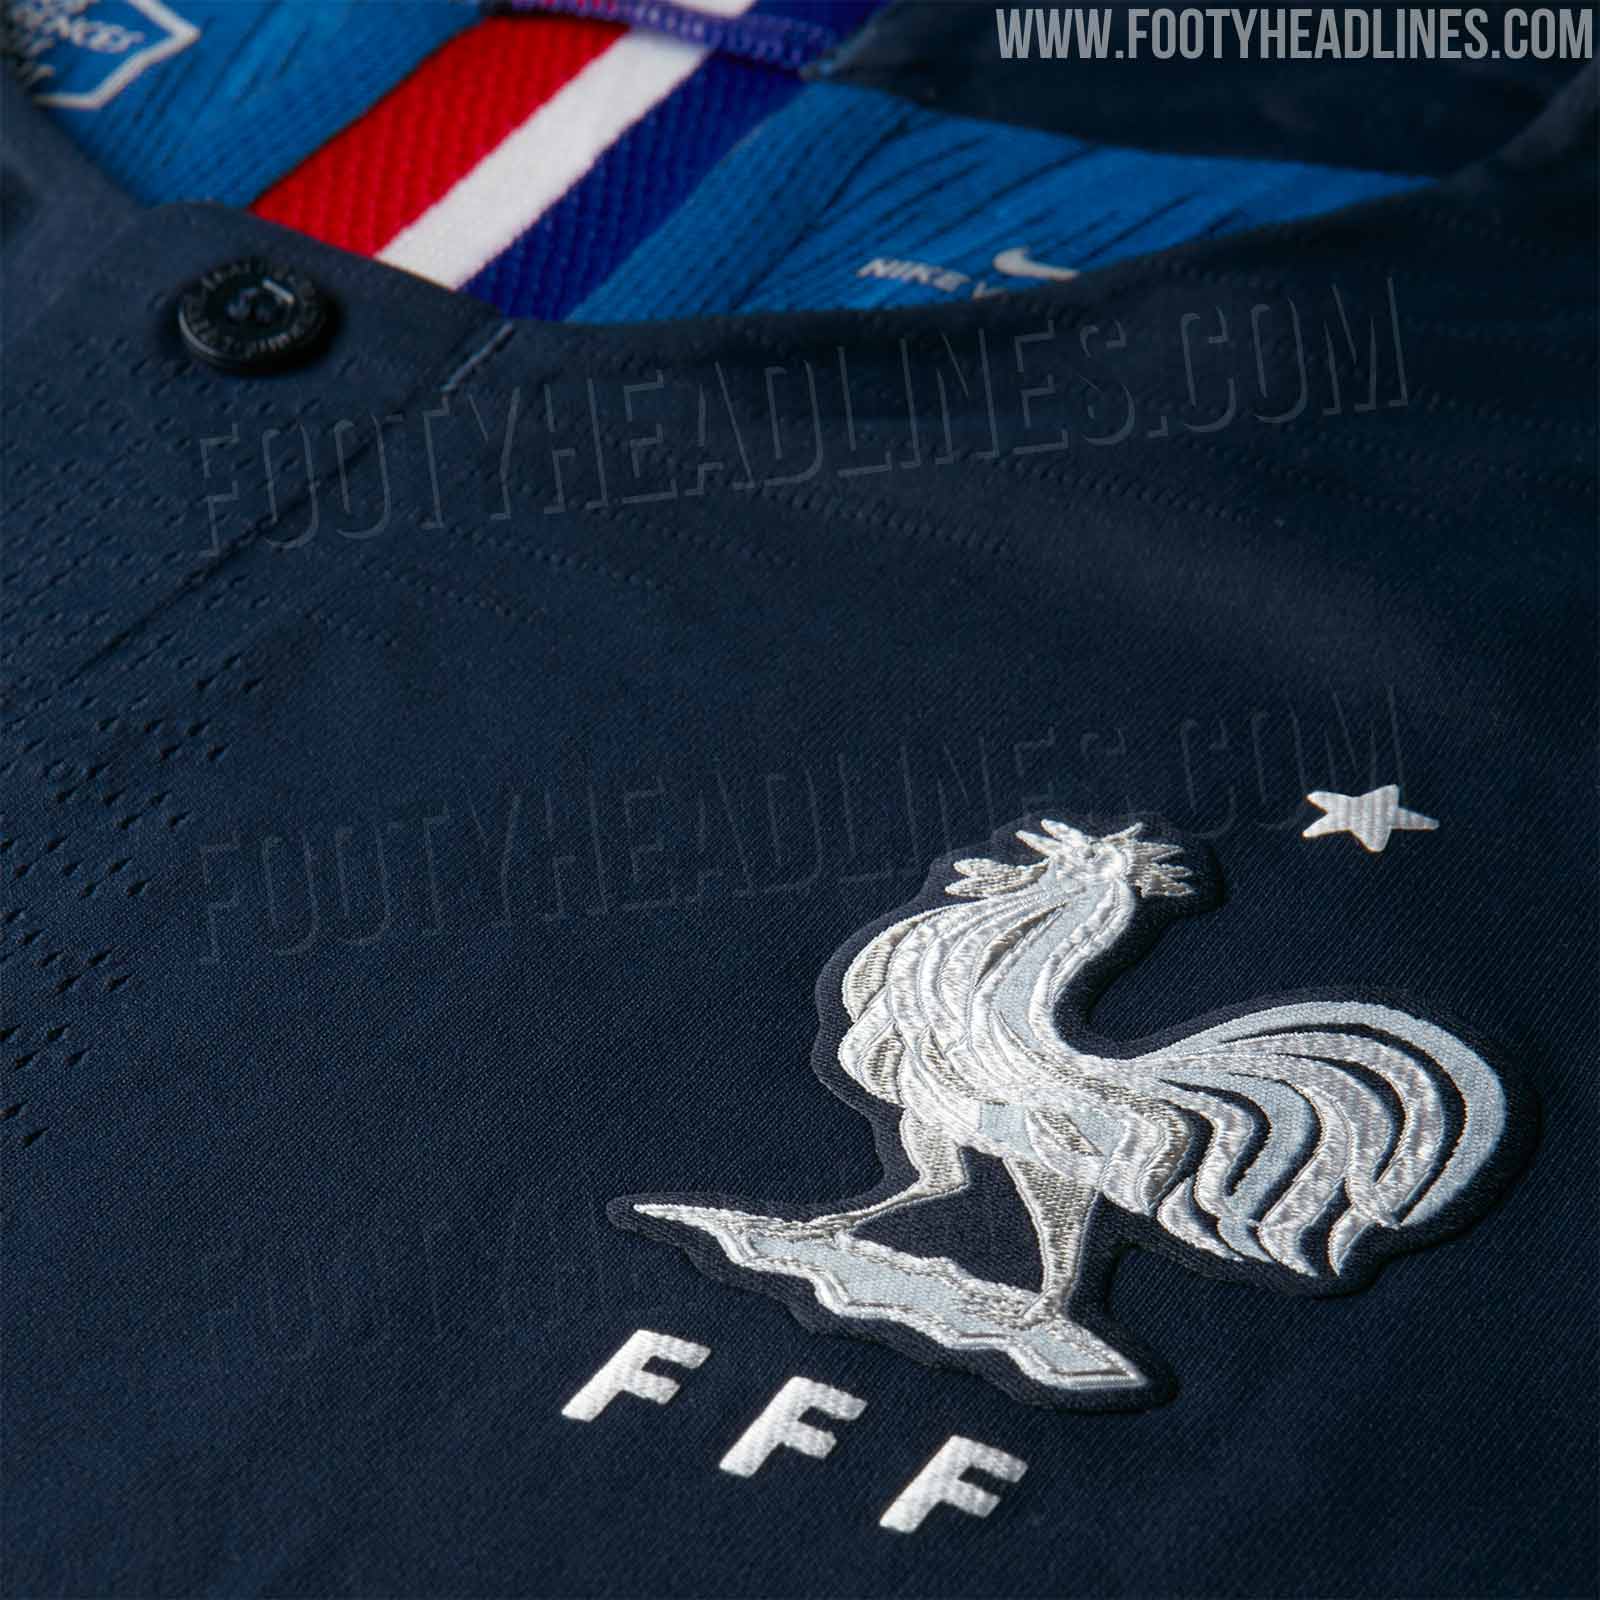 France World Cup Home Kit Revealed Footy Headlines